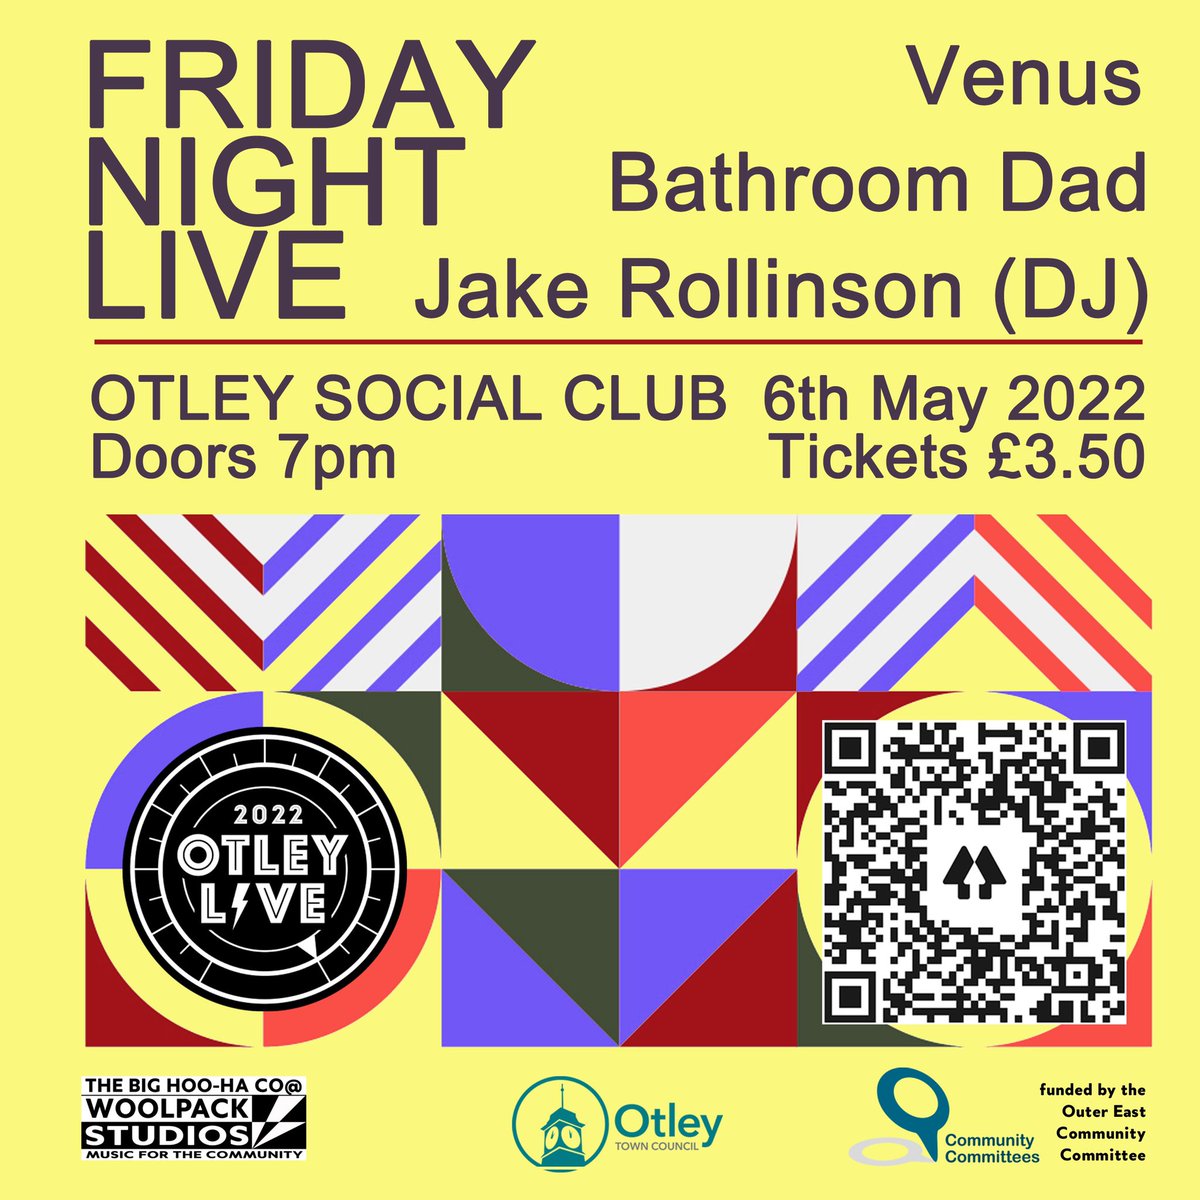 Under 18s bands night @OtleySocial 06.05.22 featuring #Venus #BathroomDad and #JakeRollinsonDJ tix £3.50 from linktree.ee/woolpackstudios come and support the stars of the future @phgsCS @PrinceHenrysGS @woodhouse_grove @visitotley @OtleyCouncil @Child_Leeds @LSChildrenMayor #otley